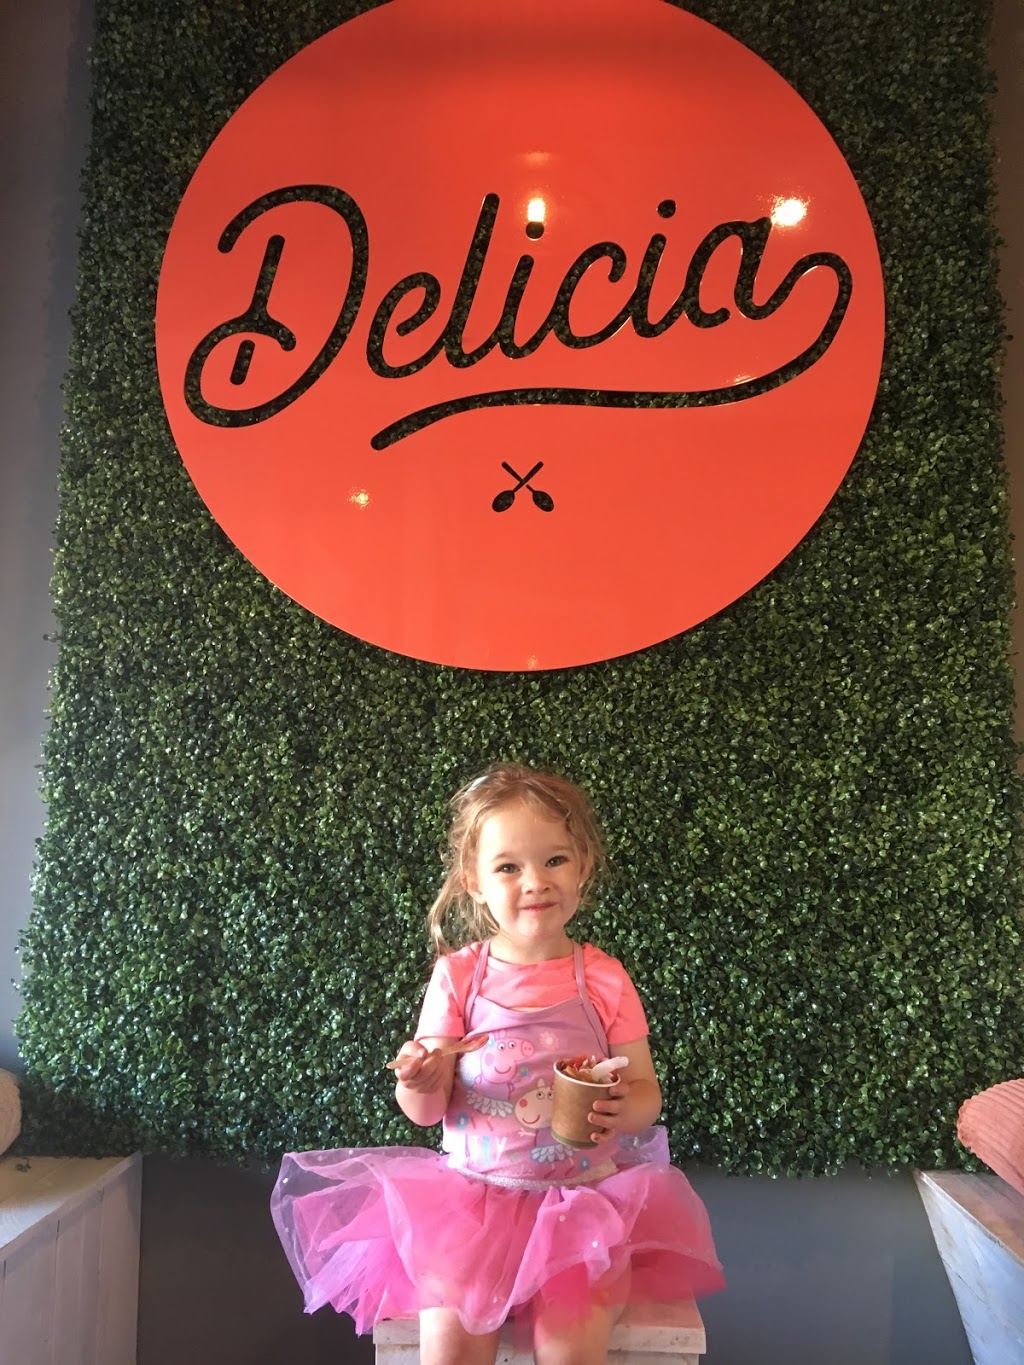 Delicia Acai + Protein Bar King William Rd | cafe | Shop 4/54 King William Rd, Goodwood SA 5034, Australia | 0401114823 OR +61 401 114 823